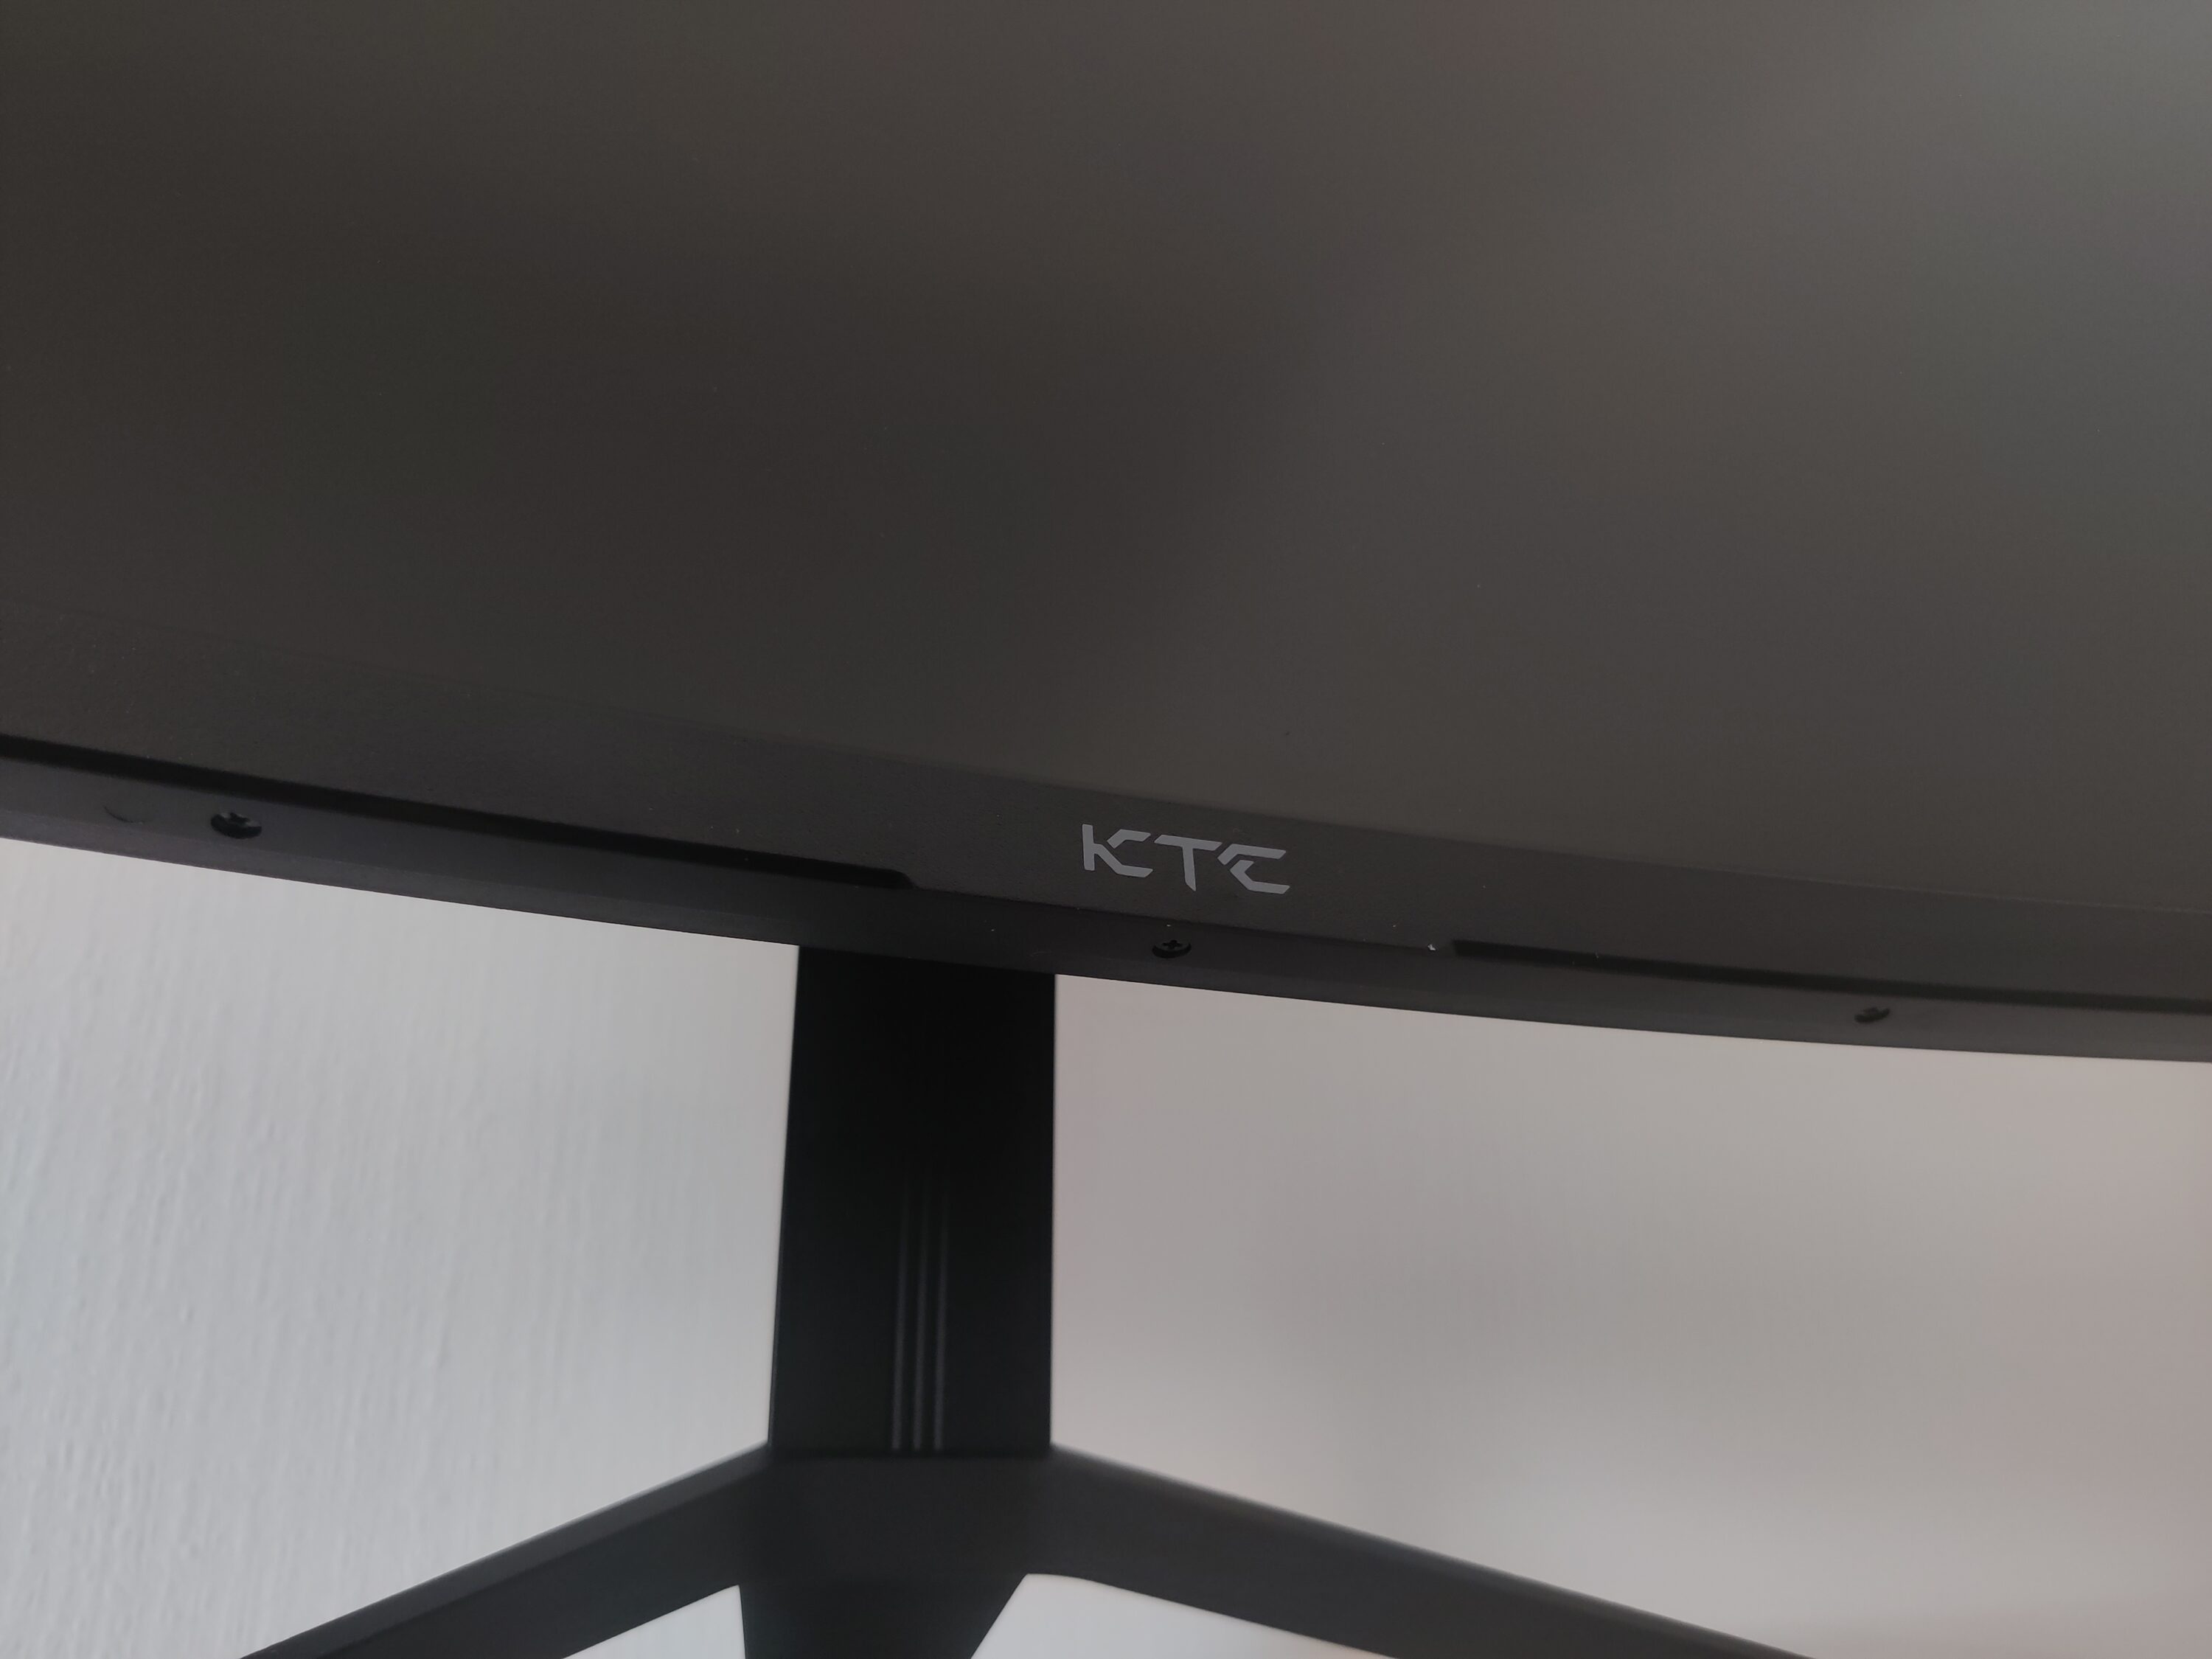 KTC H32S17 in review: An immersive gaming experience?